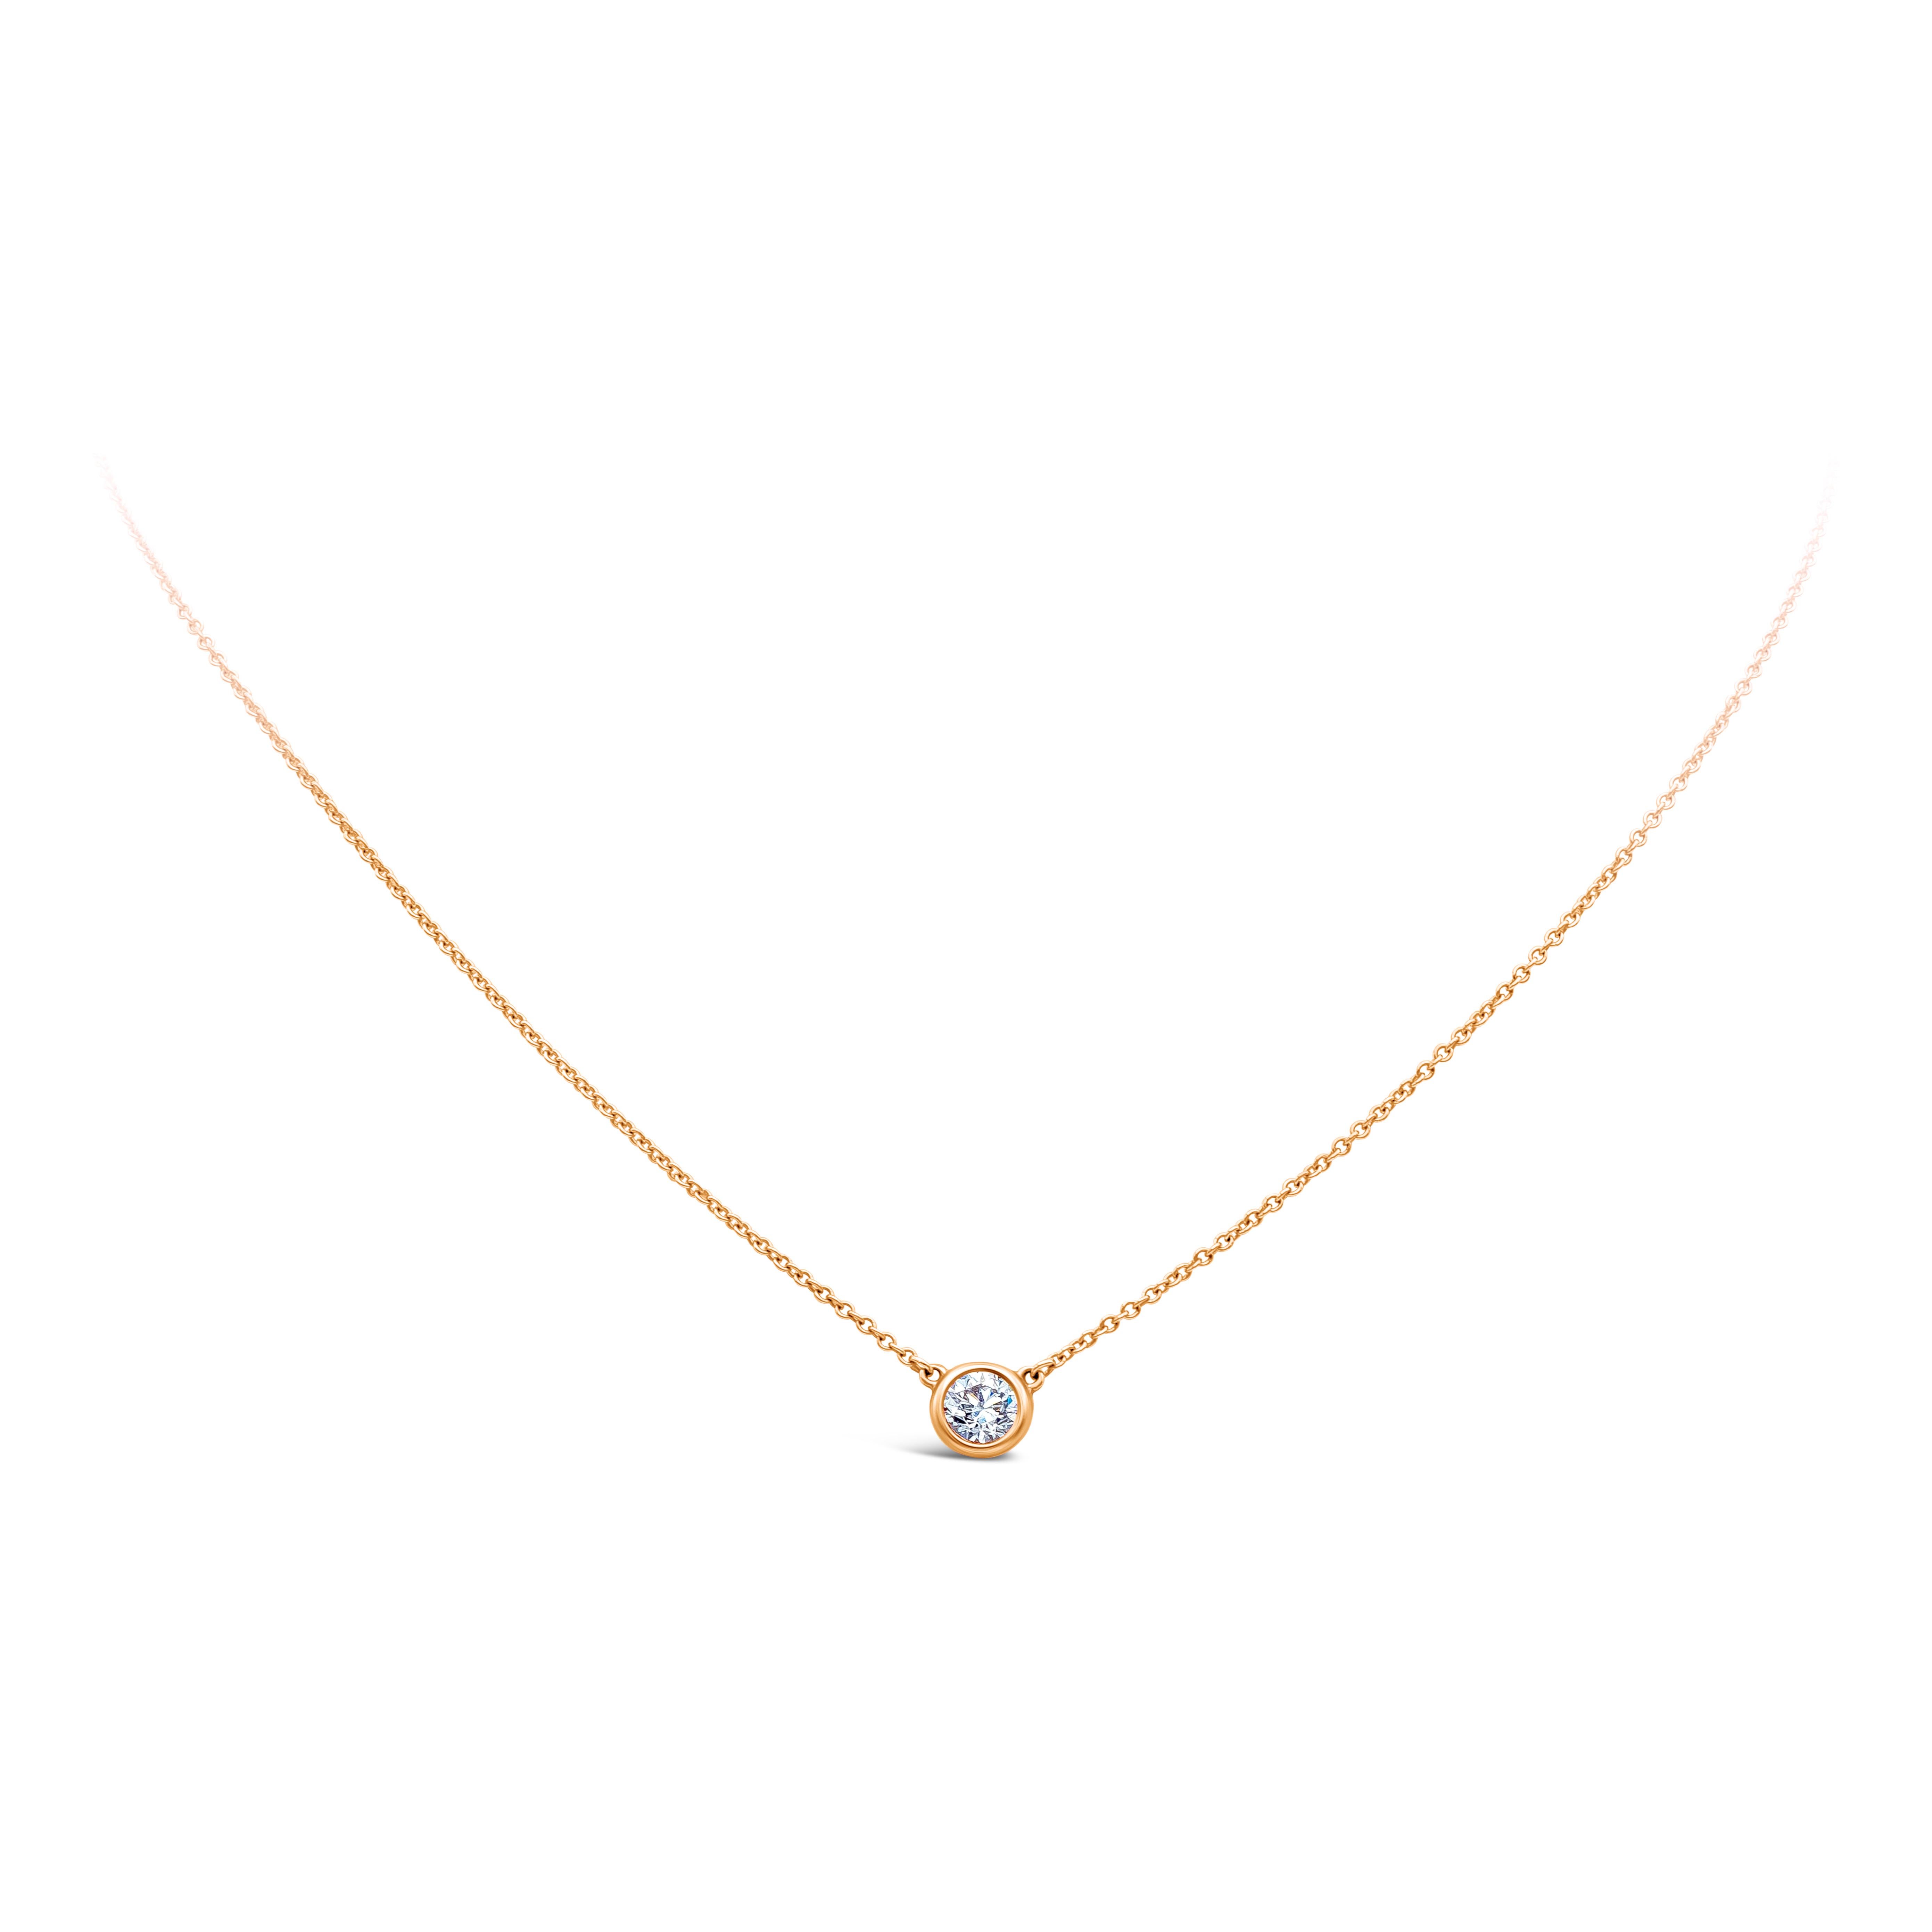 This necklace speaks simplicity. Perfect for everyday wear. Solitaire pendant necklace showcasing a single 0.47 carat round diamond G color and VS in clarity, made with 18 karat rose gold bezel set. Attached to a 16 inch with an interval at 15 inch